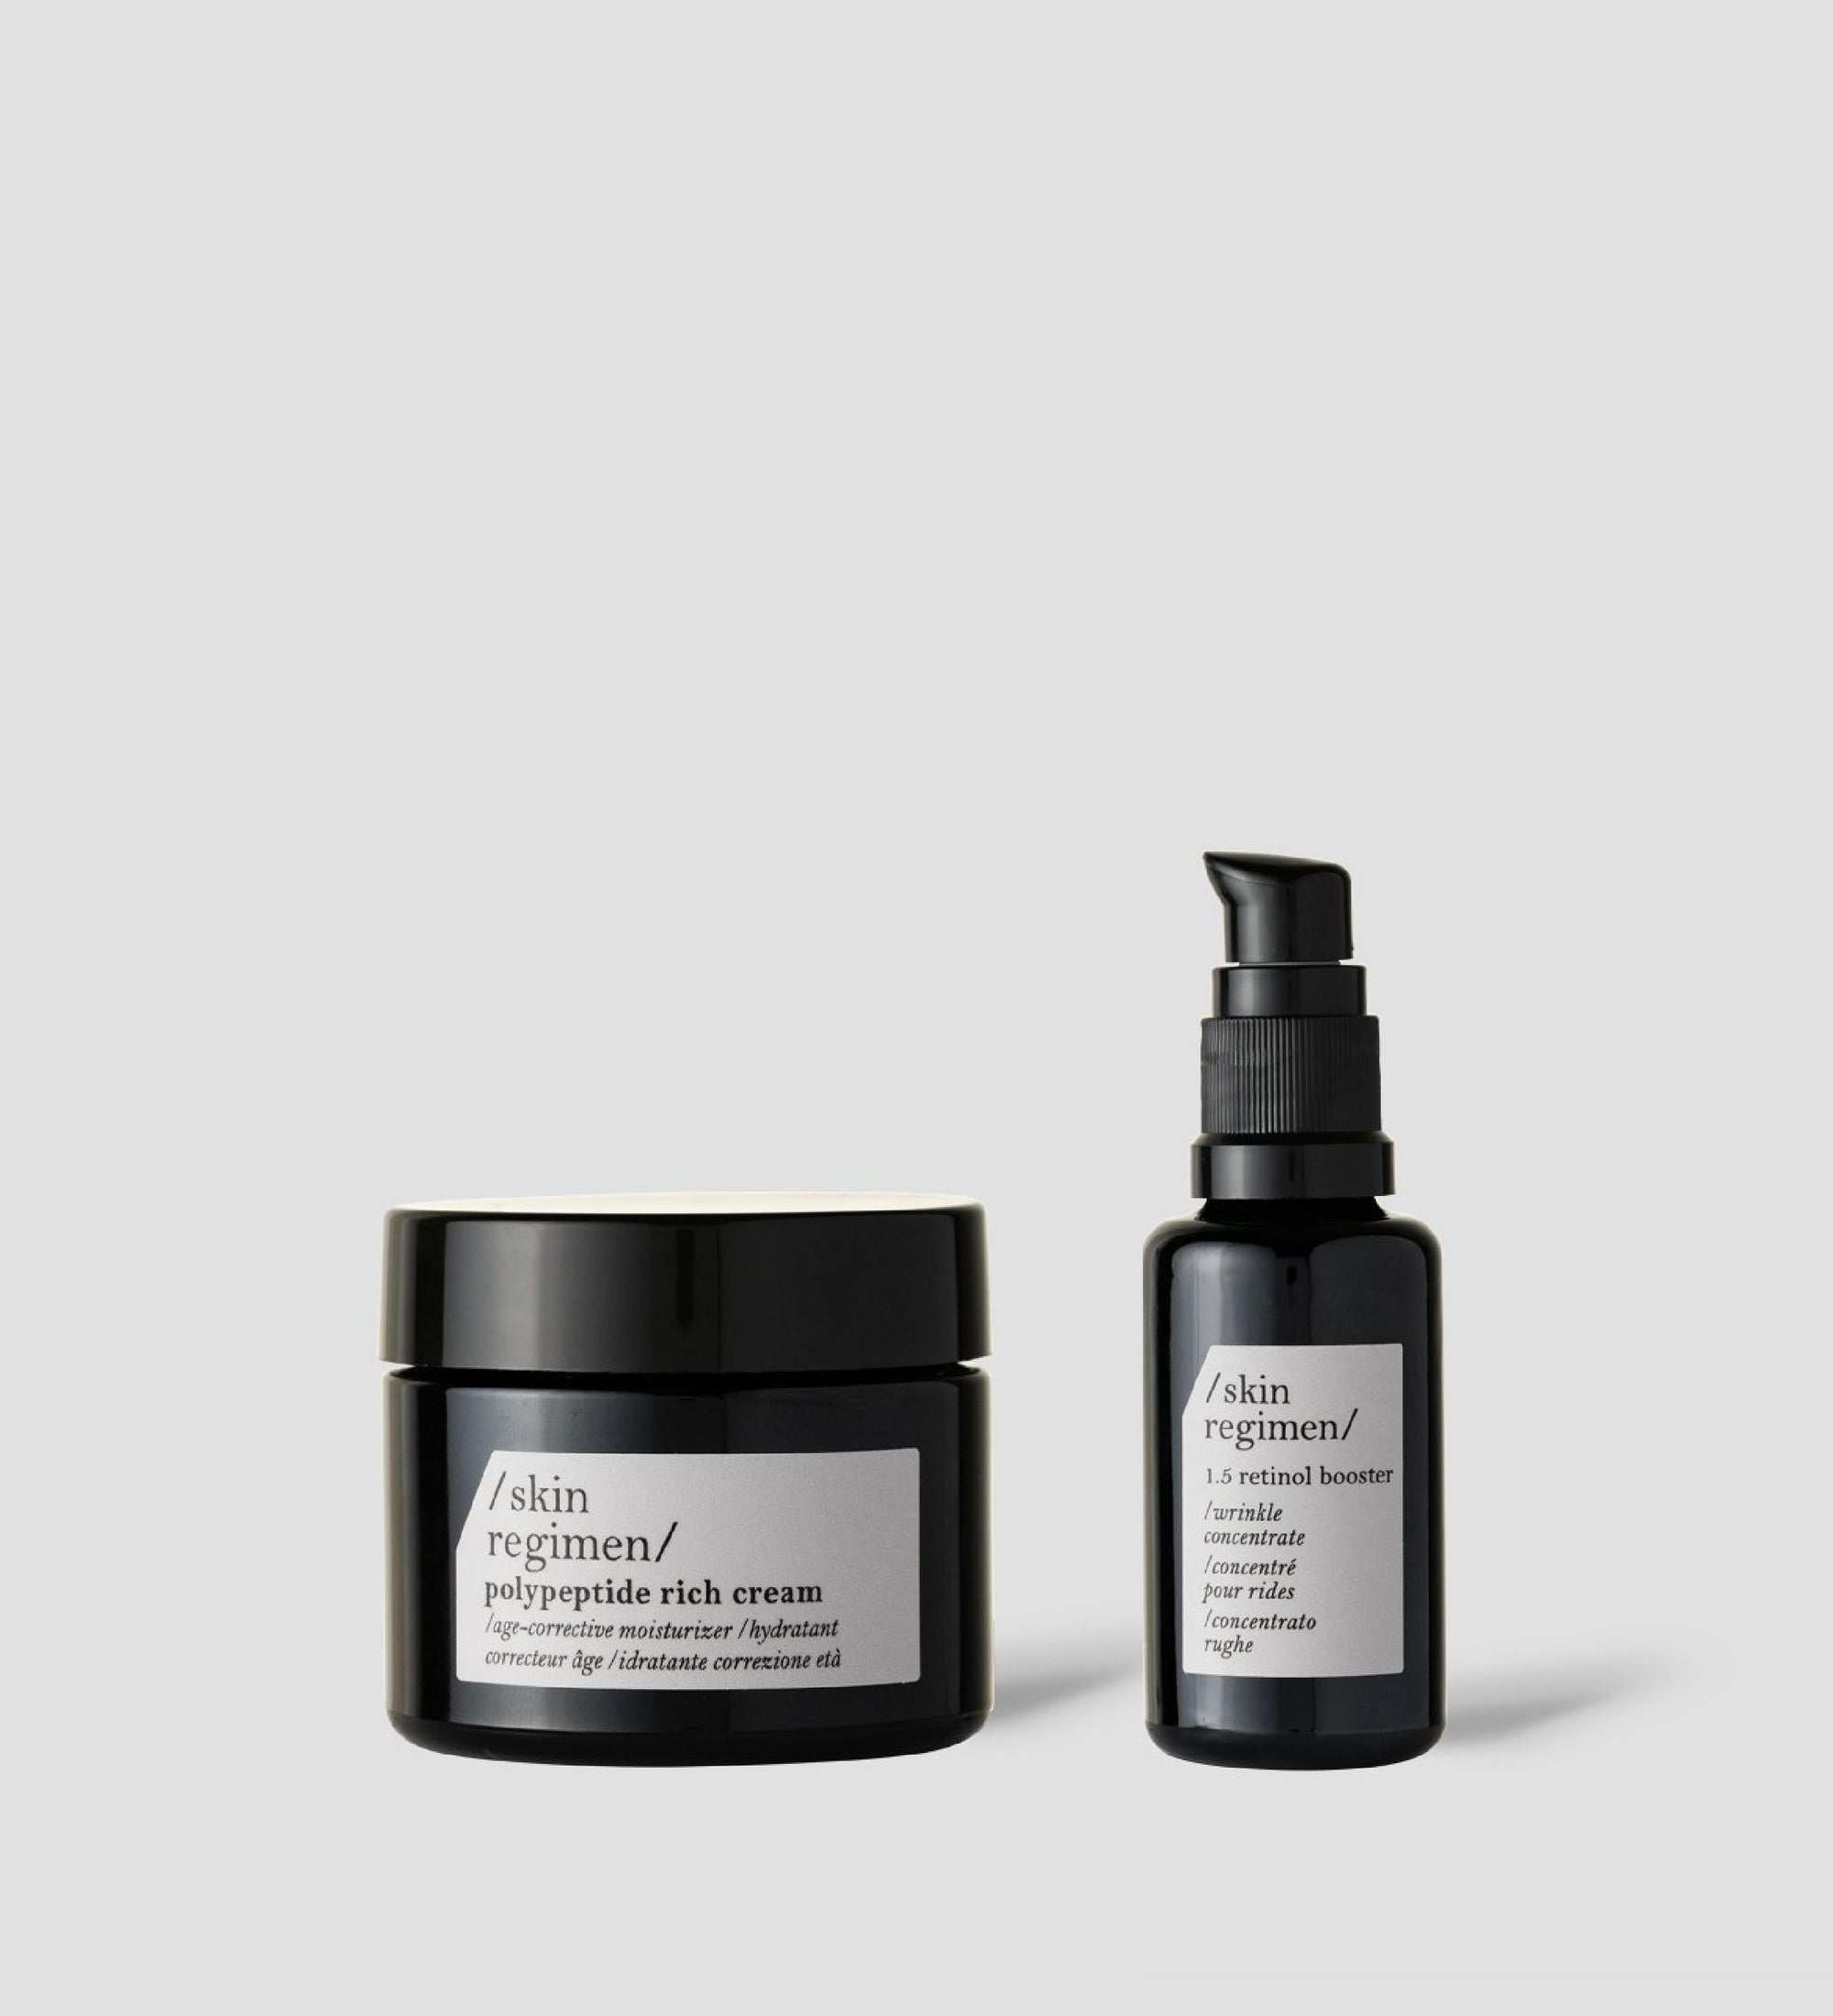 Comfort Zone: KIT The Renewing Anti-Aging Set A gift set for revitalizing your skin-
